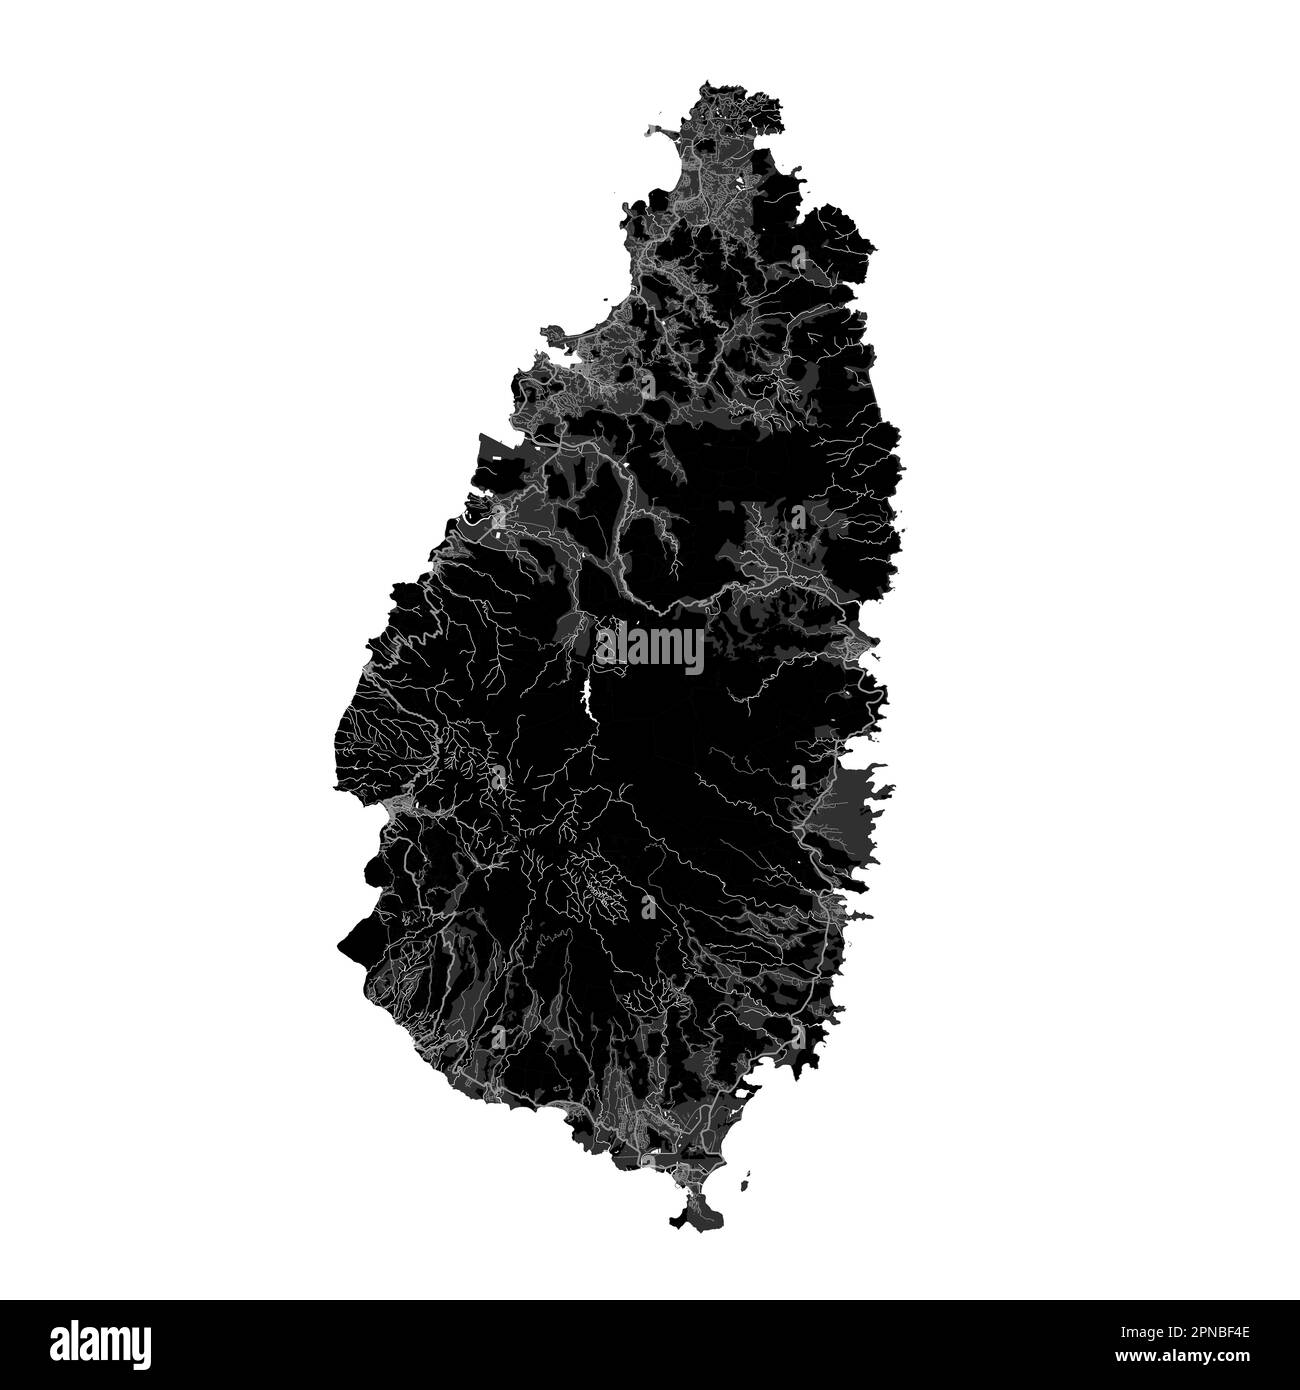 Black Saint Lucia map, Caribbean island country. Detailed map with administrative border, coastline, sea and forests, cities and roads. Stock Vector